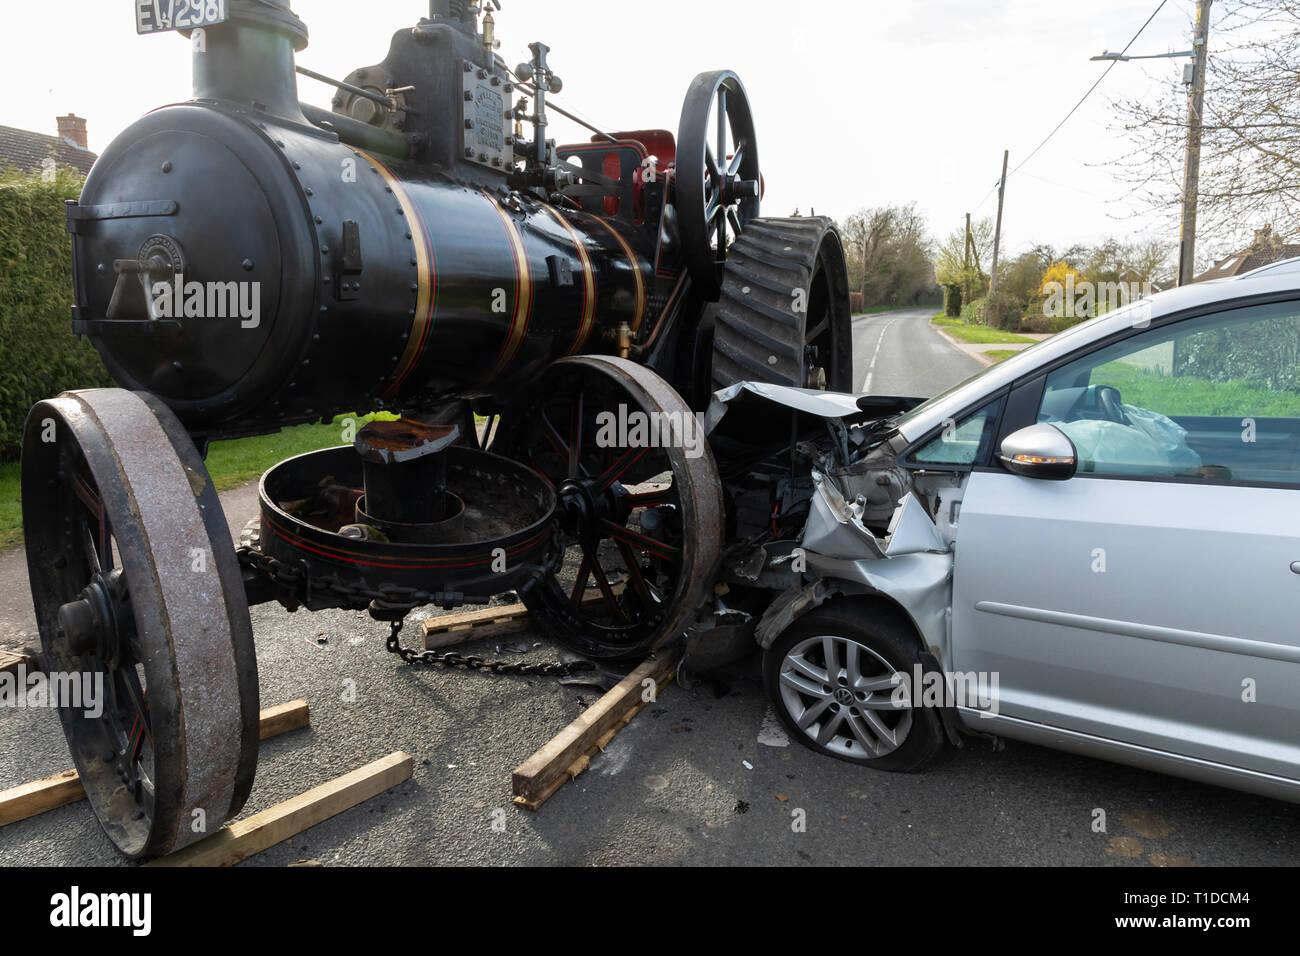 Great Barton, Suffolk, UK. 23rd March 2019. Road traffic accident involving steam traction engine and a VolkswagonTouran in Great Barton, Suffolk, UK Stock Photo